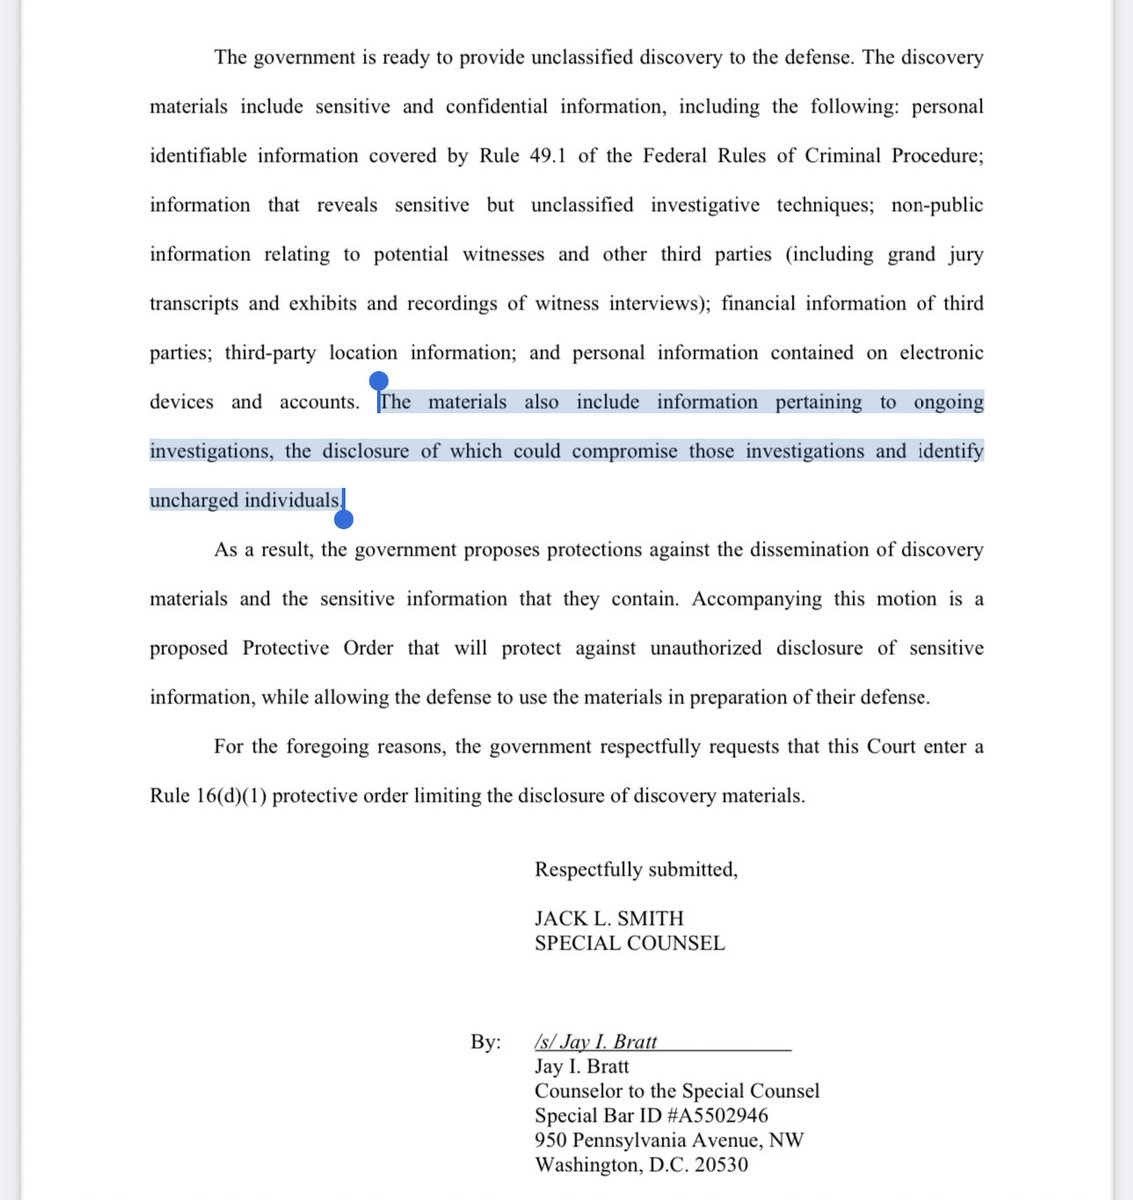 NEW: Special Counsel Jack Smith seeks to limit disclosure of discovery related to classified docs case.

Among the reasons:

The materials “include information pertaining to ongoing investigations… which could compromise those investigations and identify uncharged individuals.”